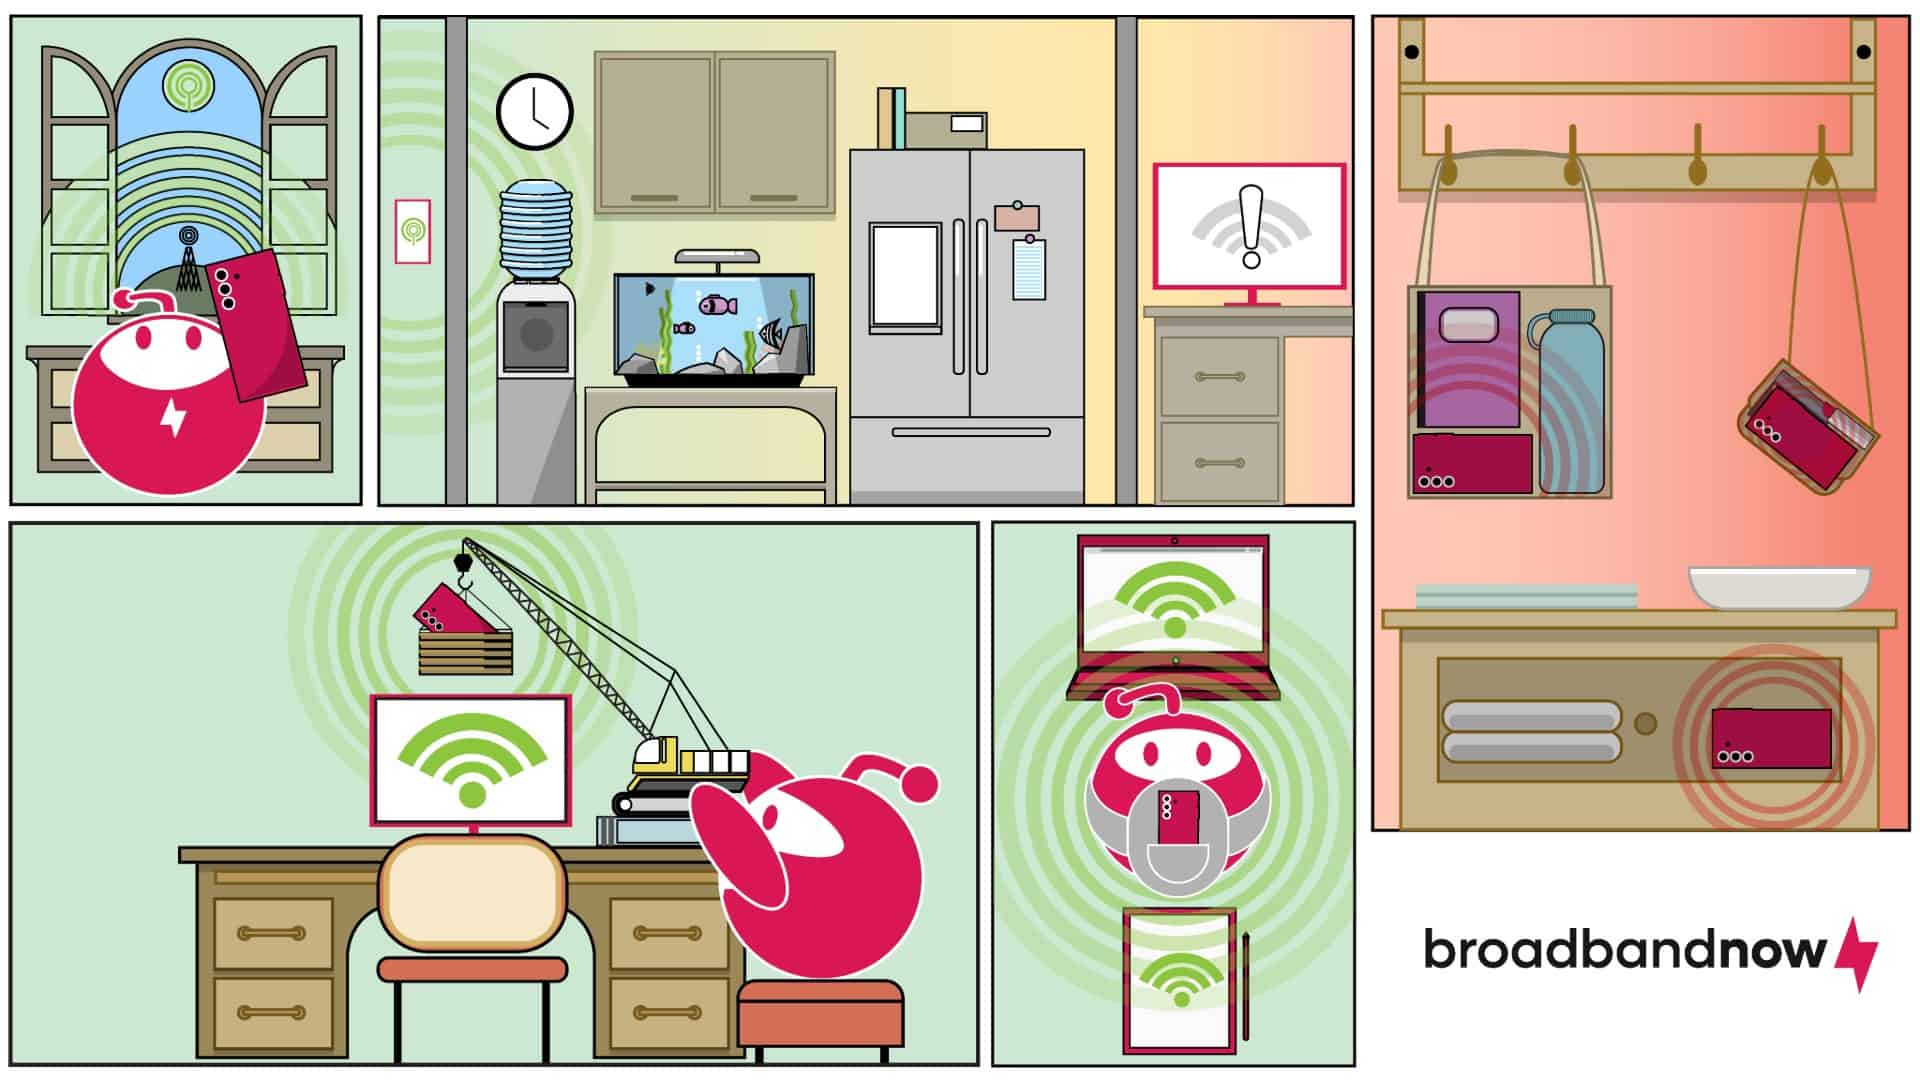 A graphic of Zippy showing where to place a hotspot device in different areas of the house. 